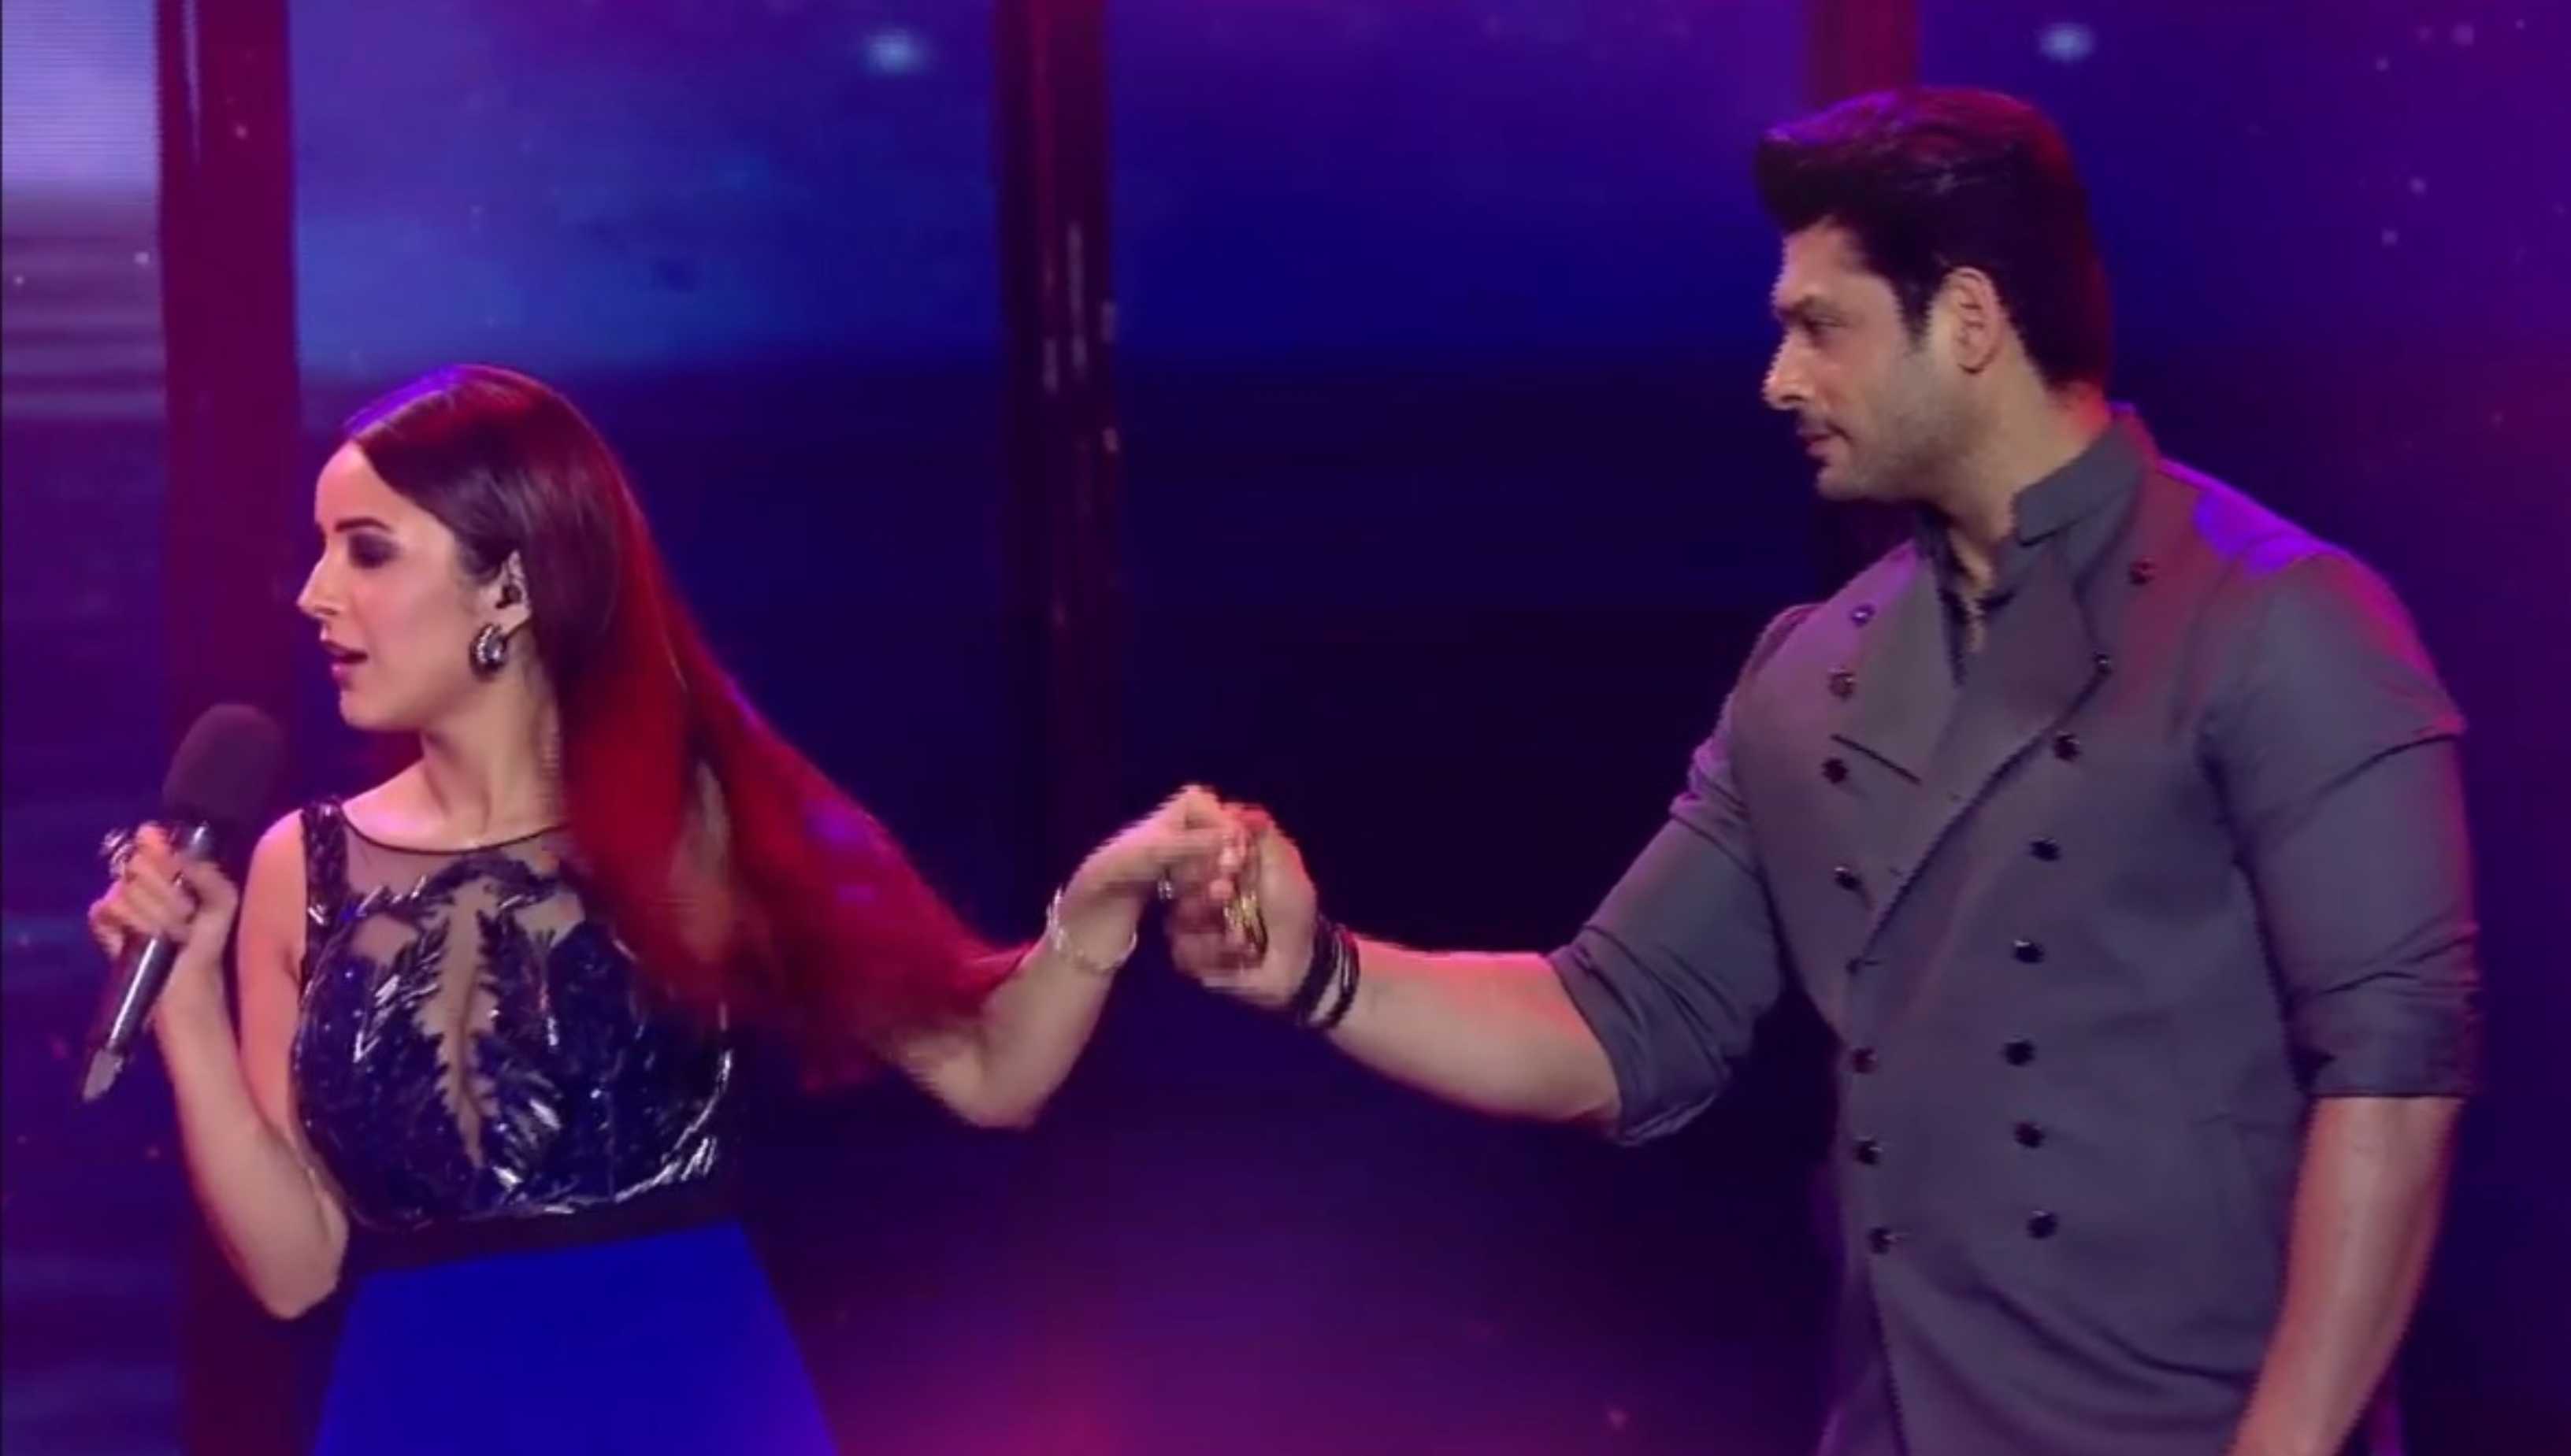 Sidharth Shukla’s last performance with Shehnaaz Gill made us fall in love with Sidnaaz all over again; watch